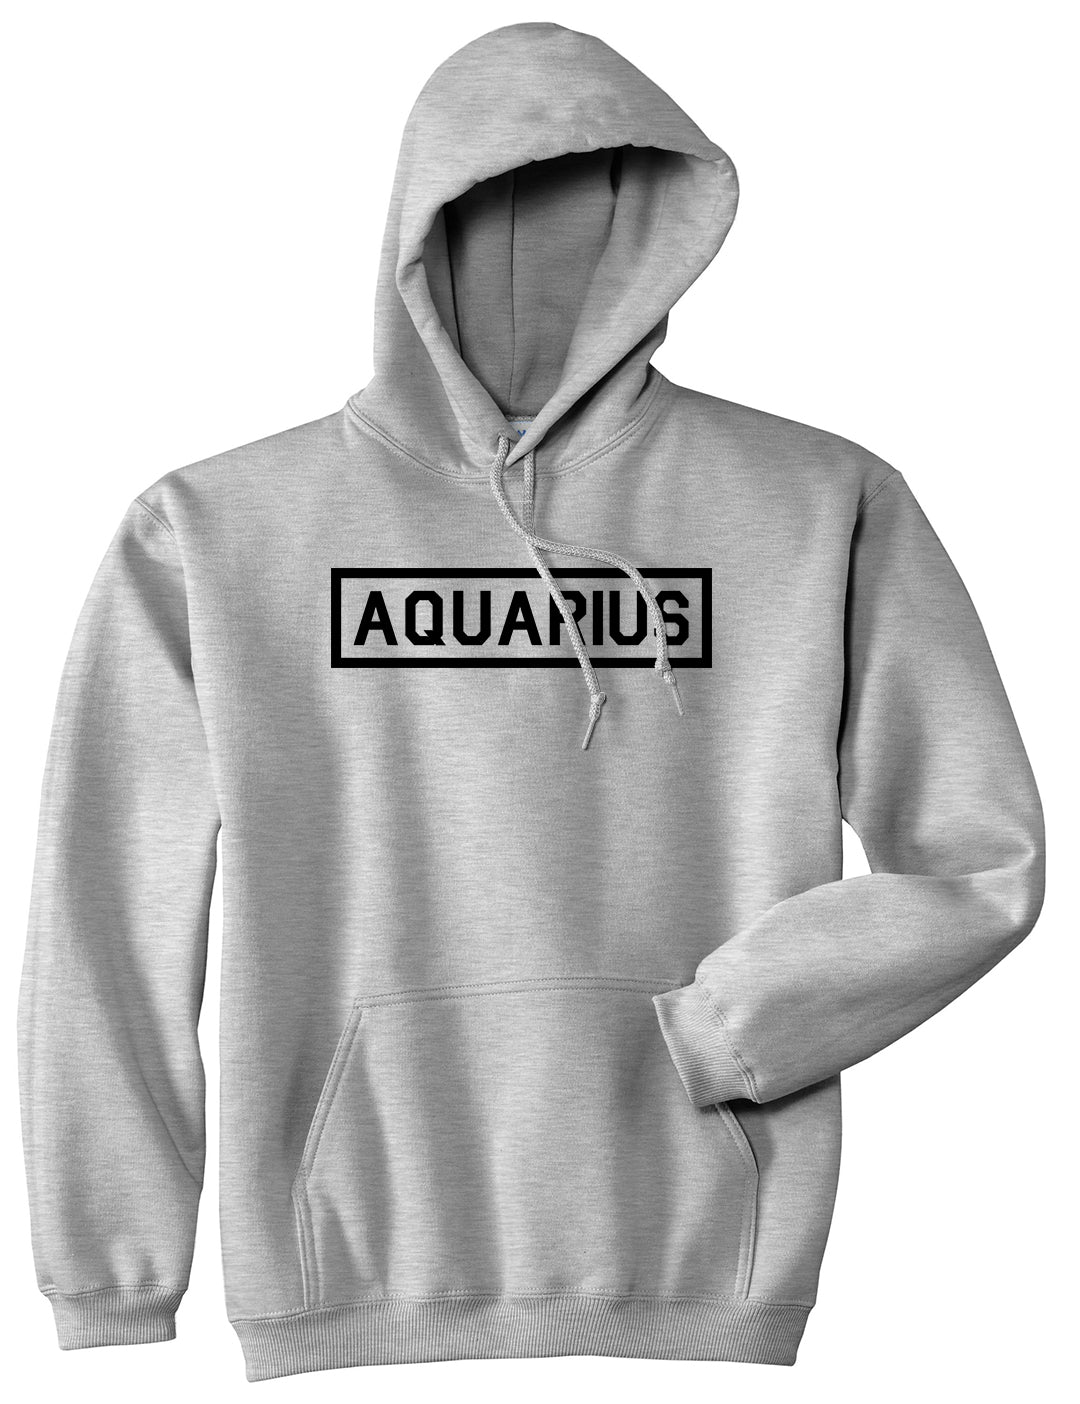 Aquarius Horoscope Sign Mens Grey Pullover Hoodie by KINGS OF NY